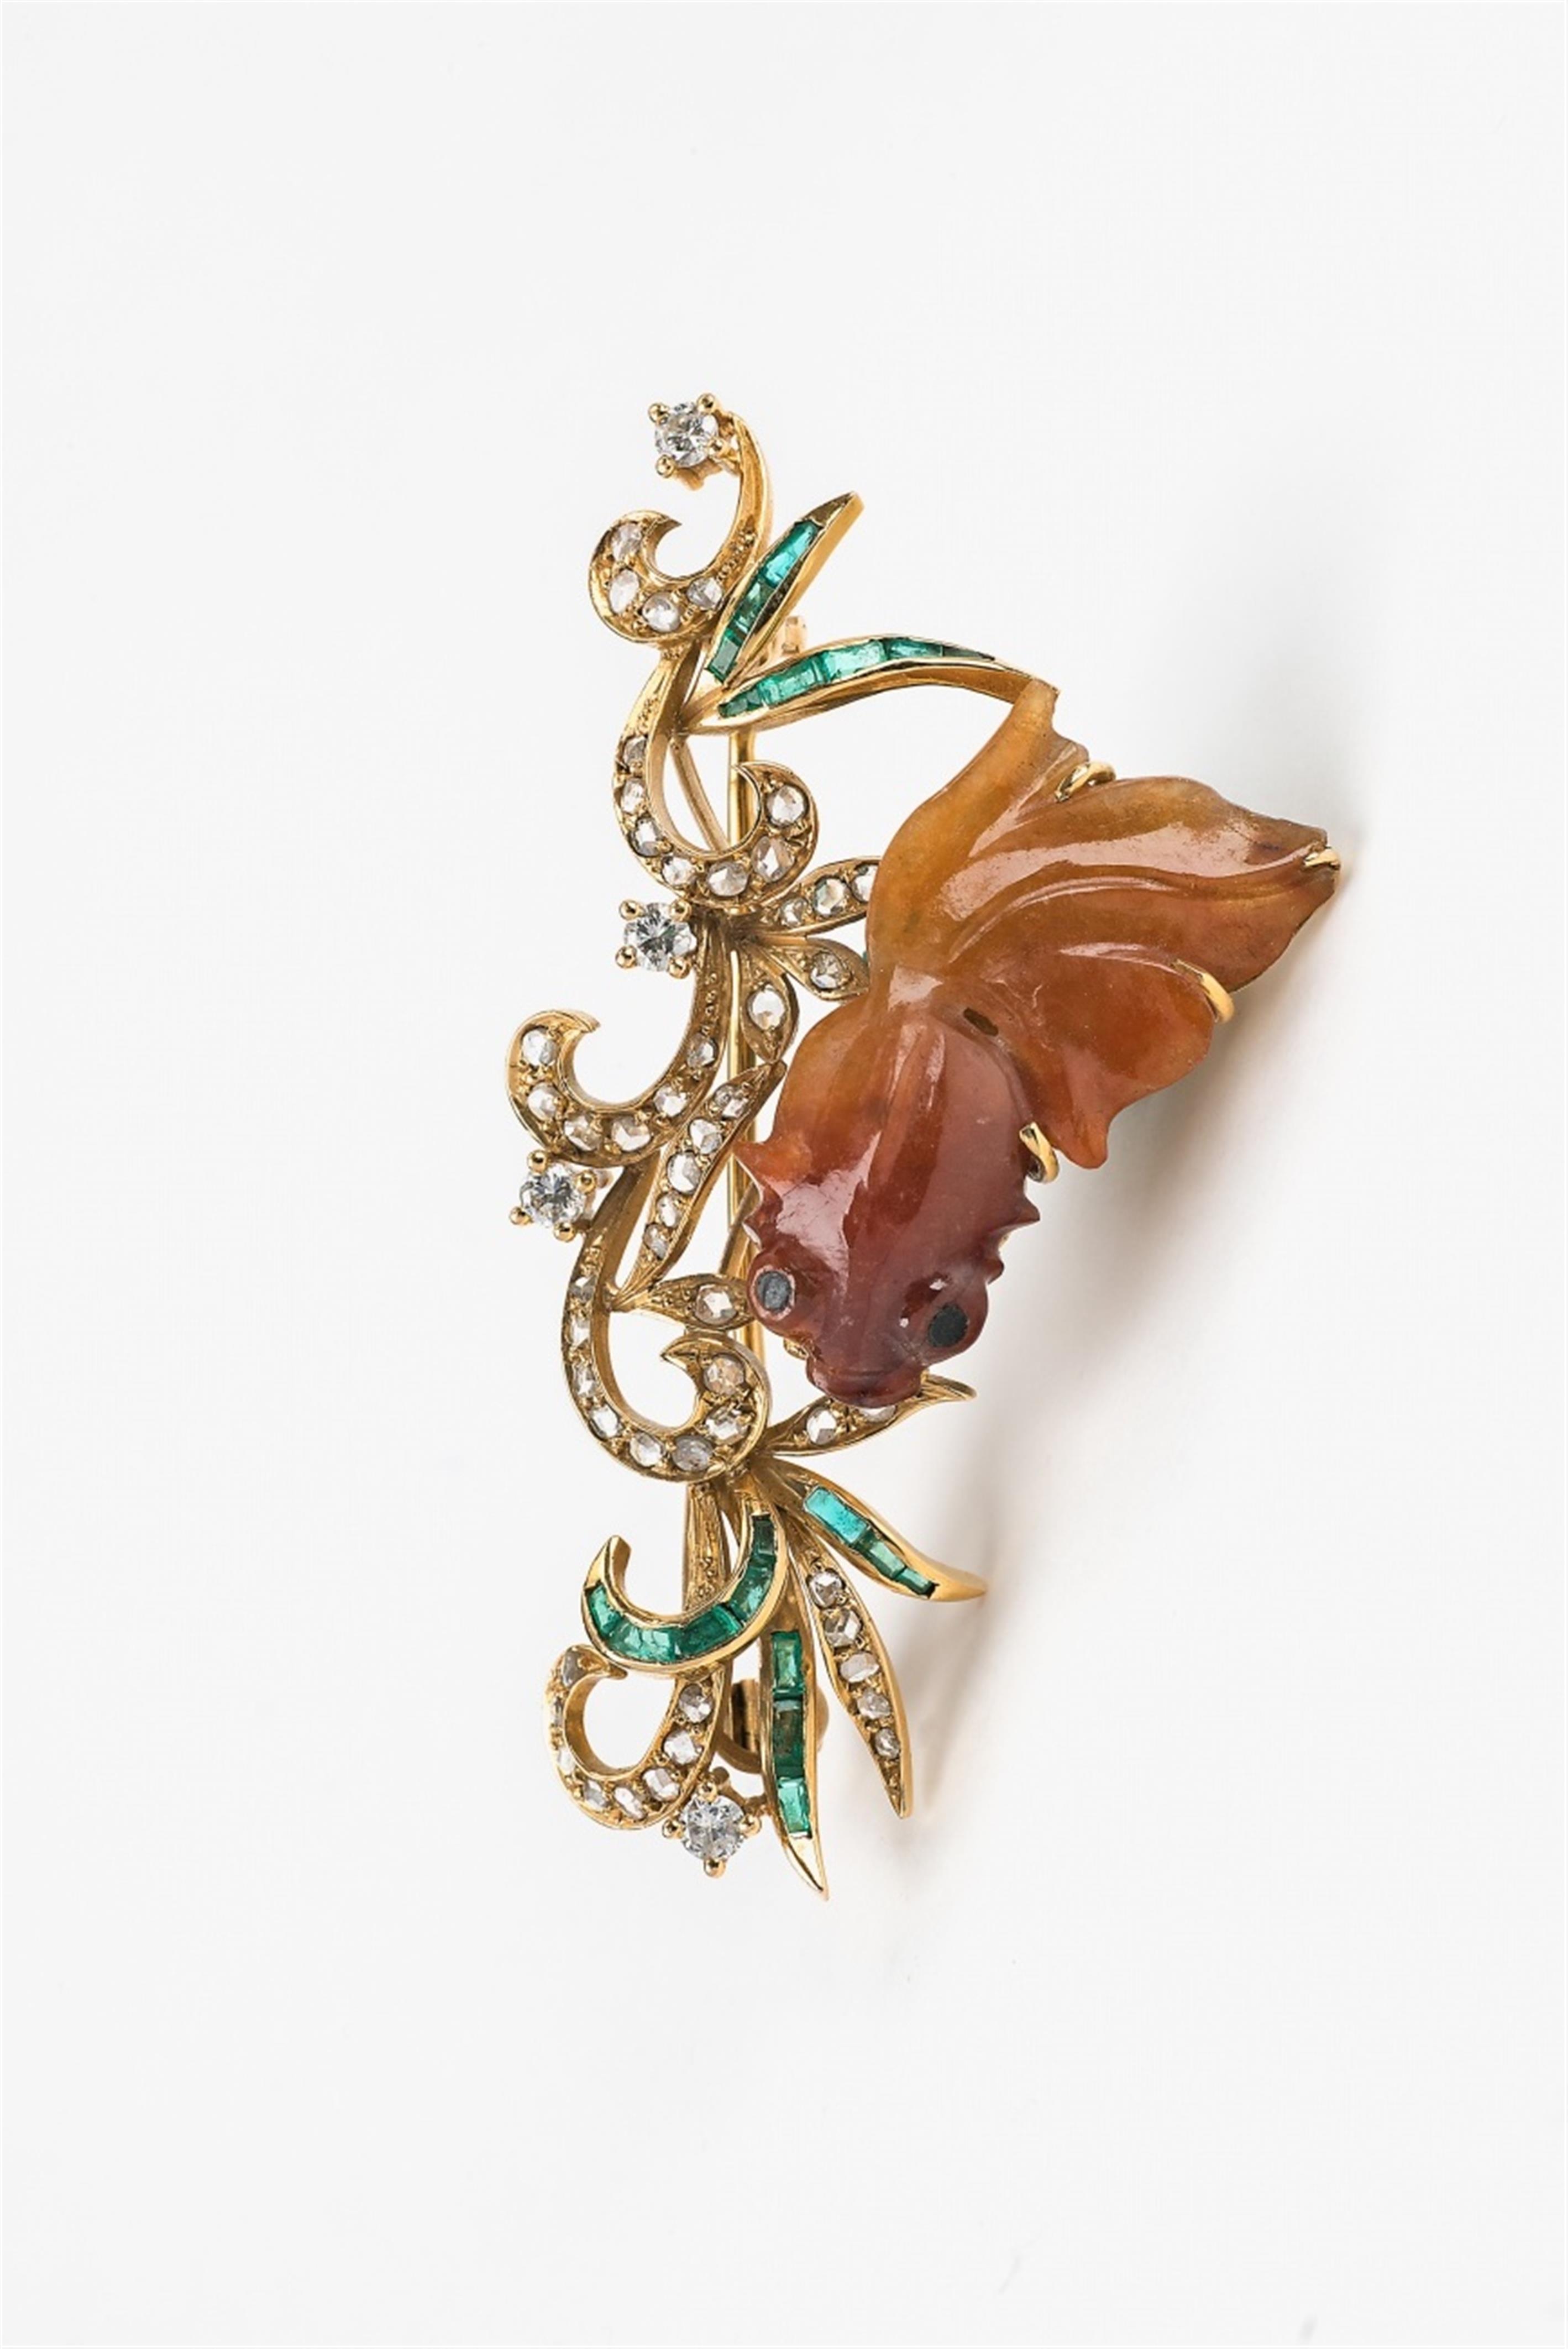 An 18k gold and jade brooch - image-1